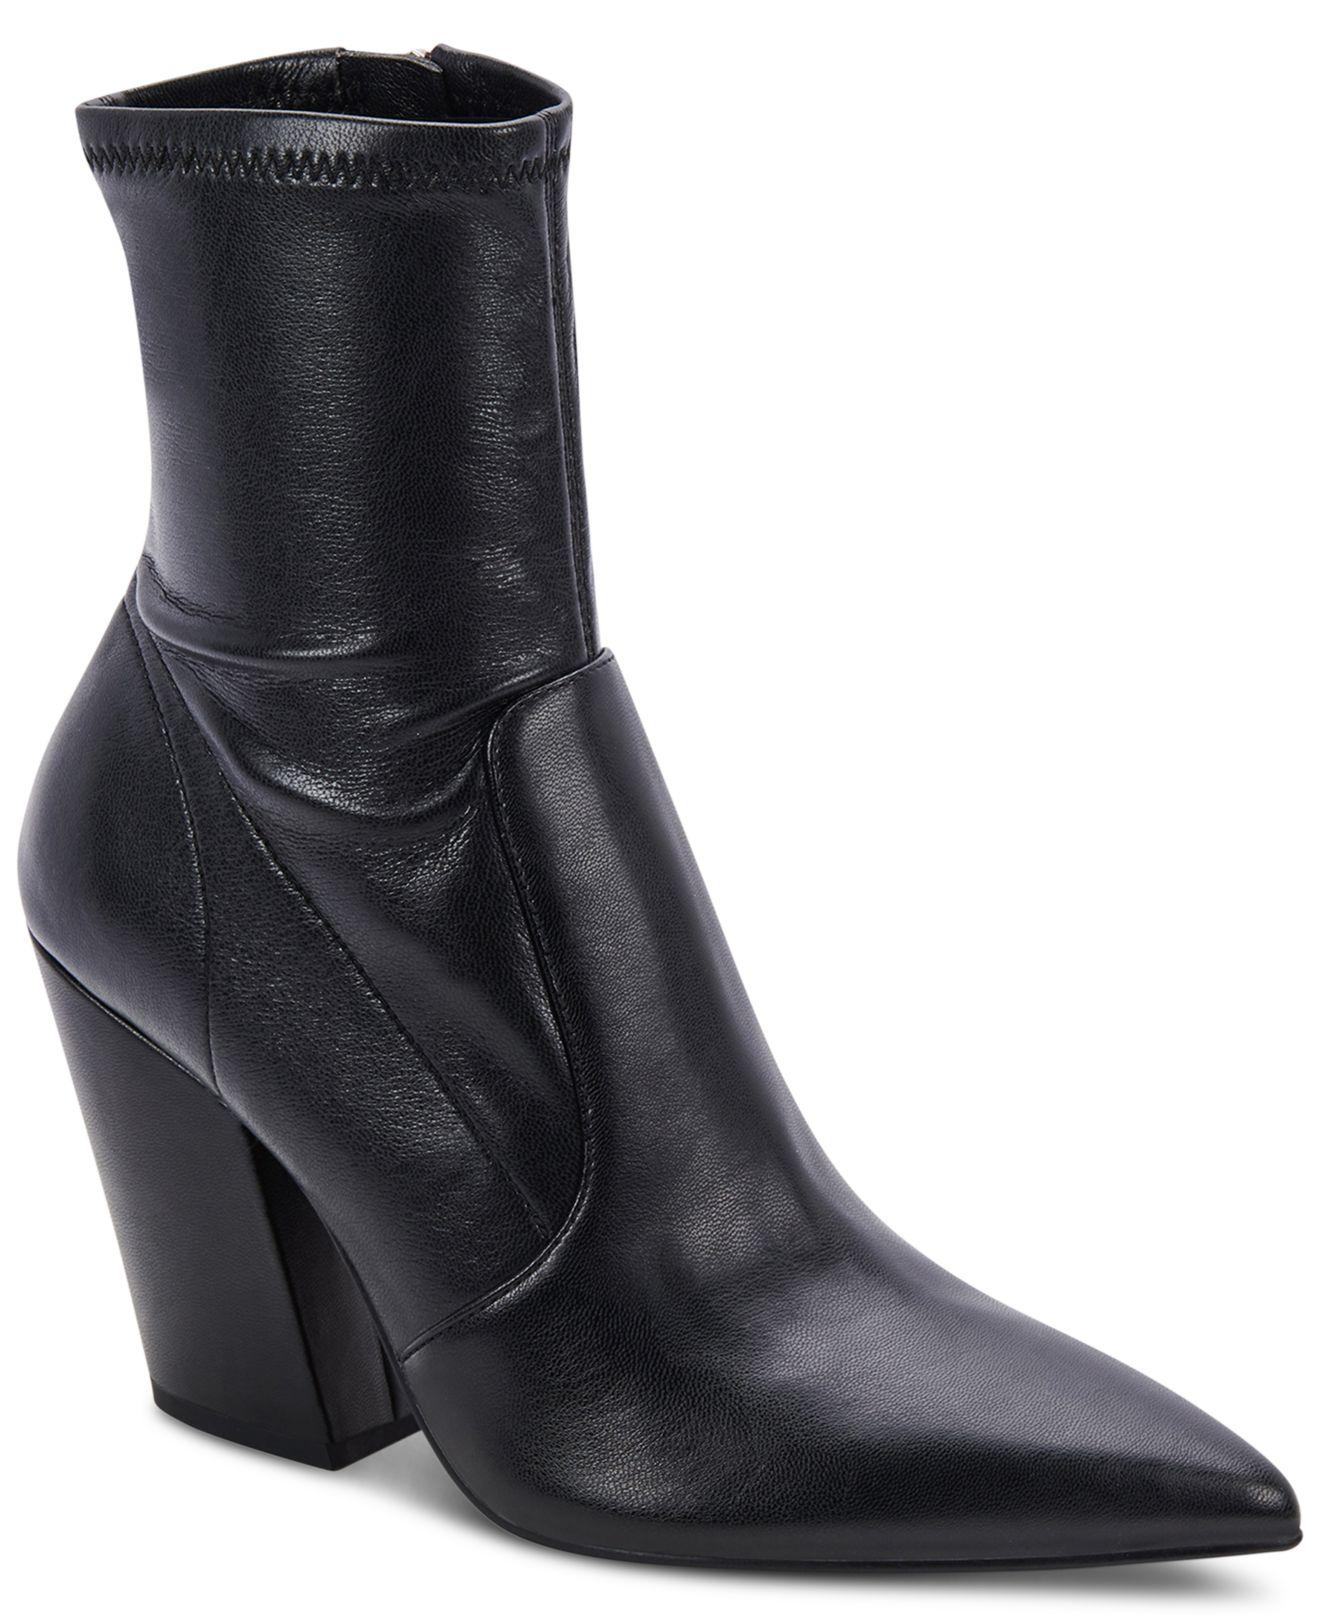 Dolce Vita Nello Pointed-toe Dress Booties in Black | Lyst